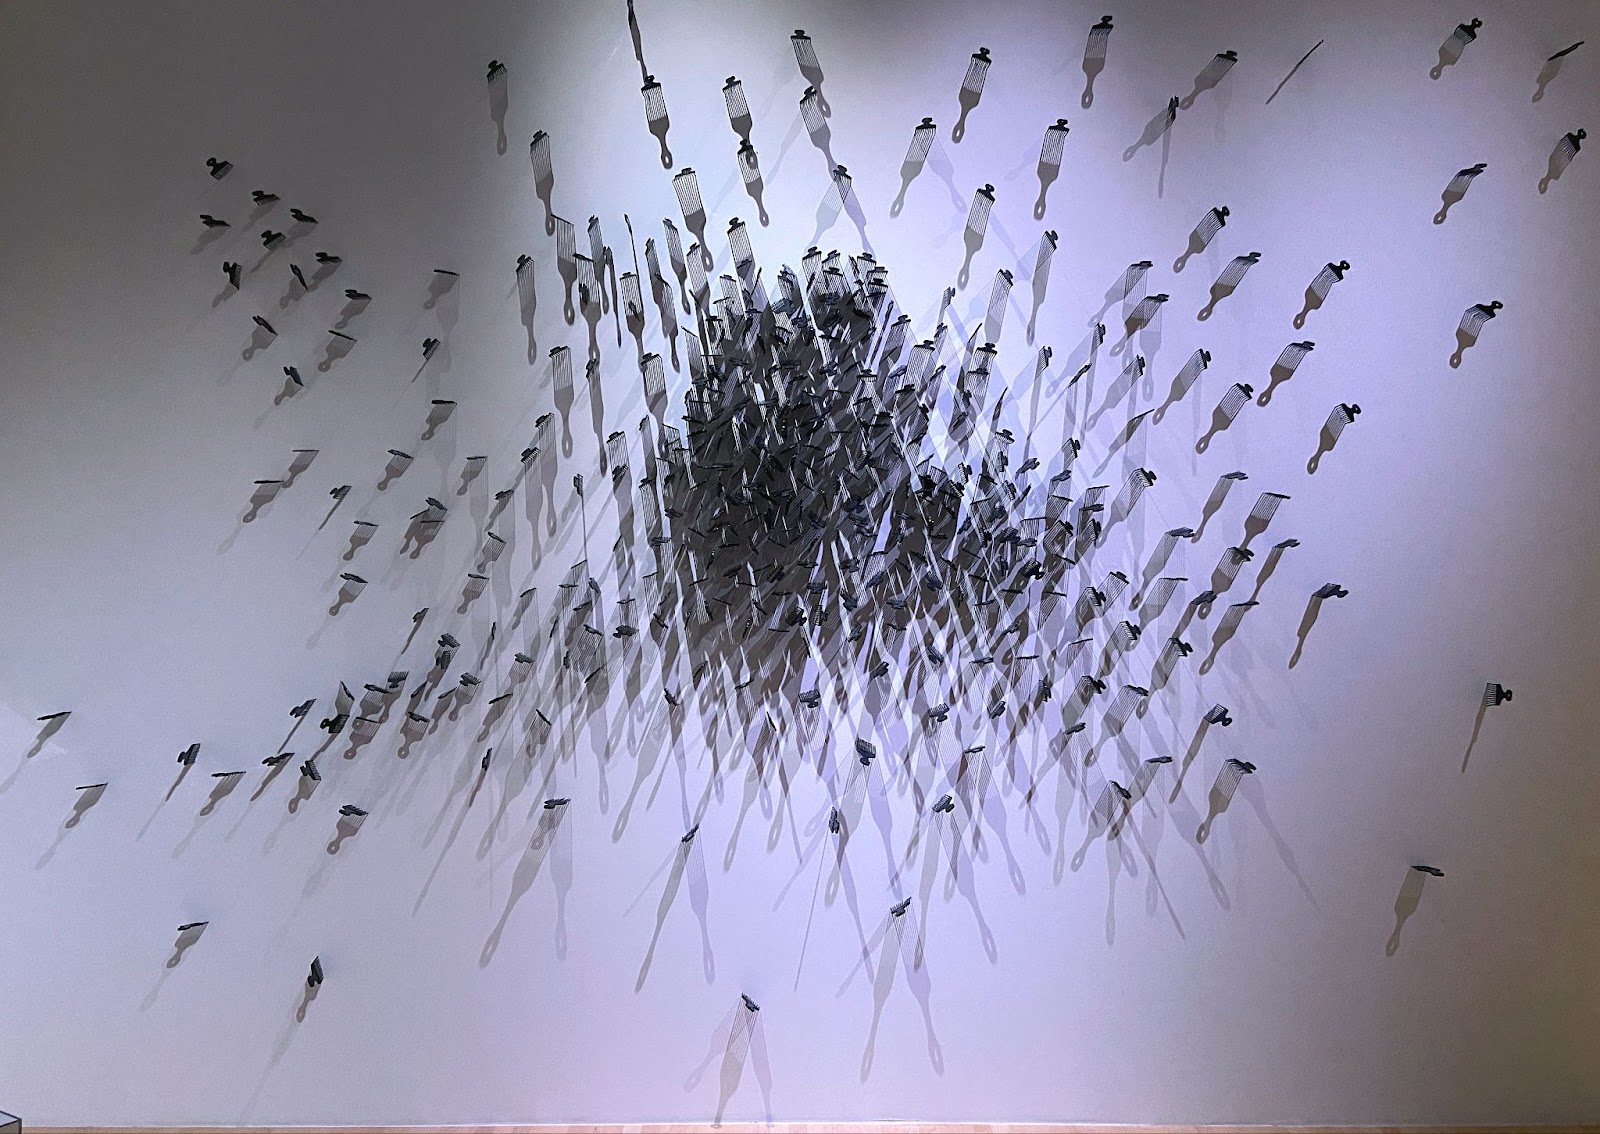 Image: A wall installation of black hair picks embedded in a white gallery wall. There is a larger cluster of combs in the center of the image, with other combs fanning out in a vague star-shaped pattern. Photo by Jessica Hammie. 